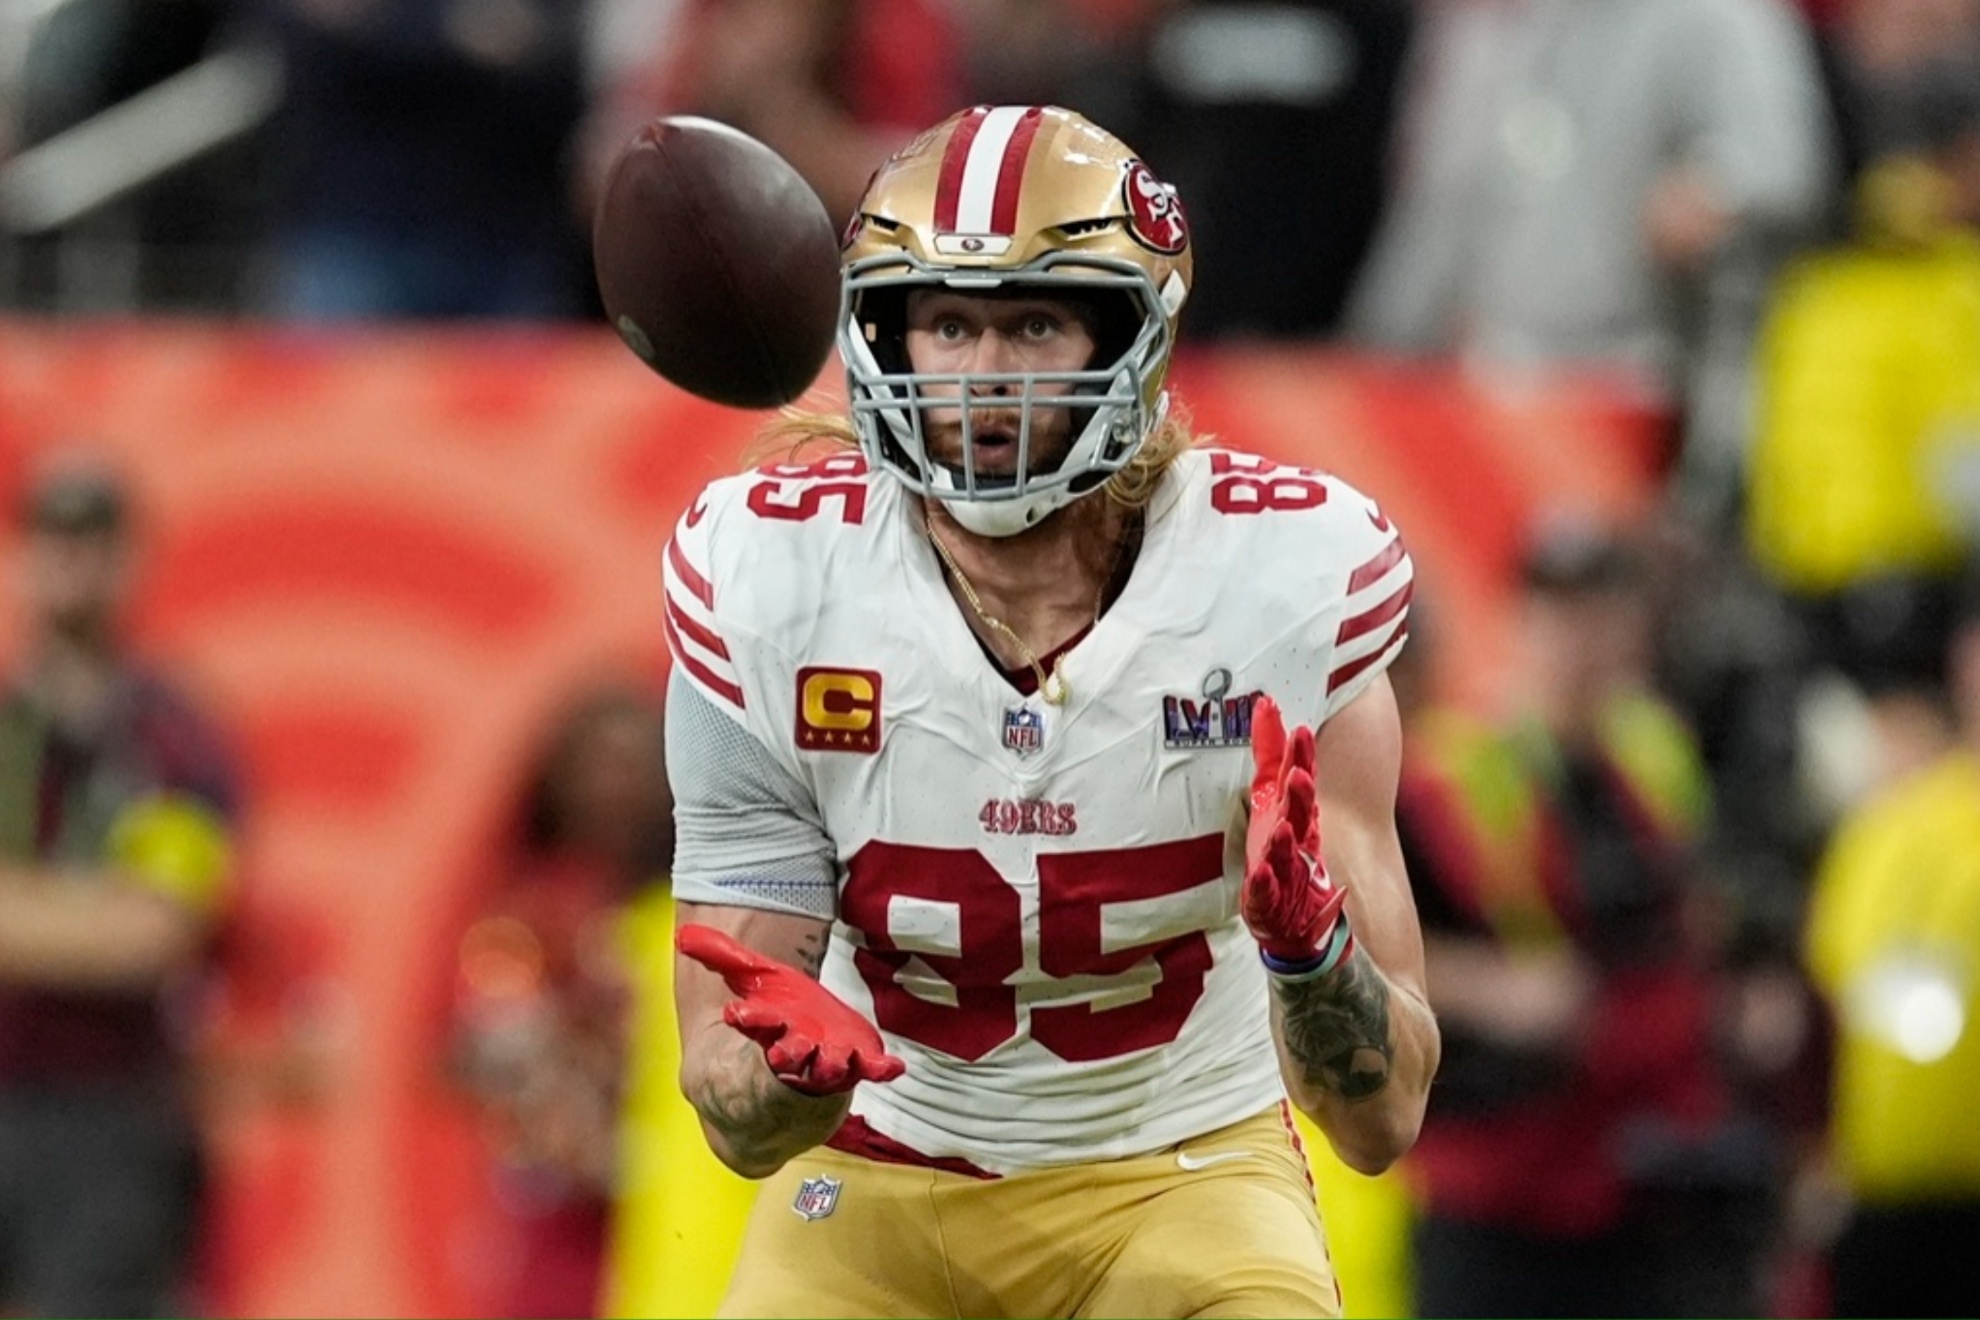 Where do Travis Kelce and George Kittle fit in among the great NFL tight  ends?